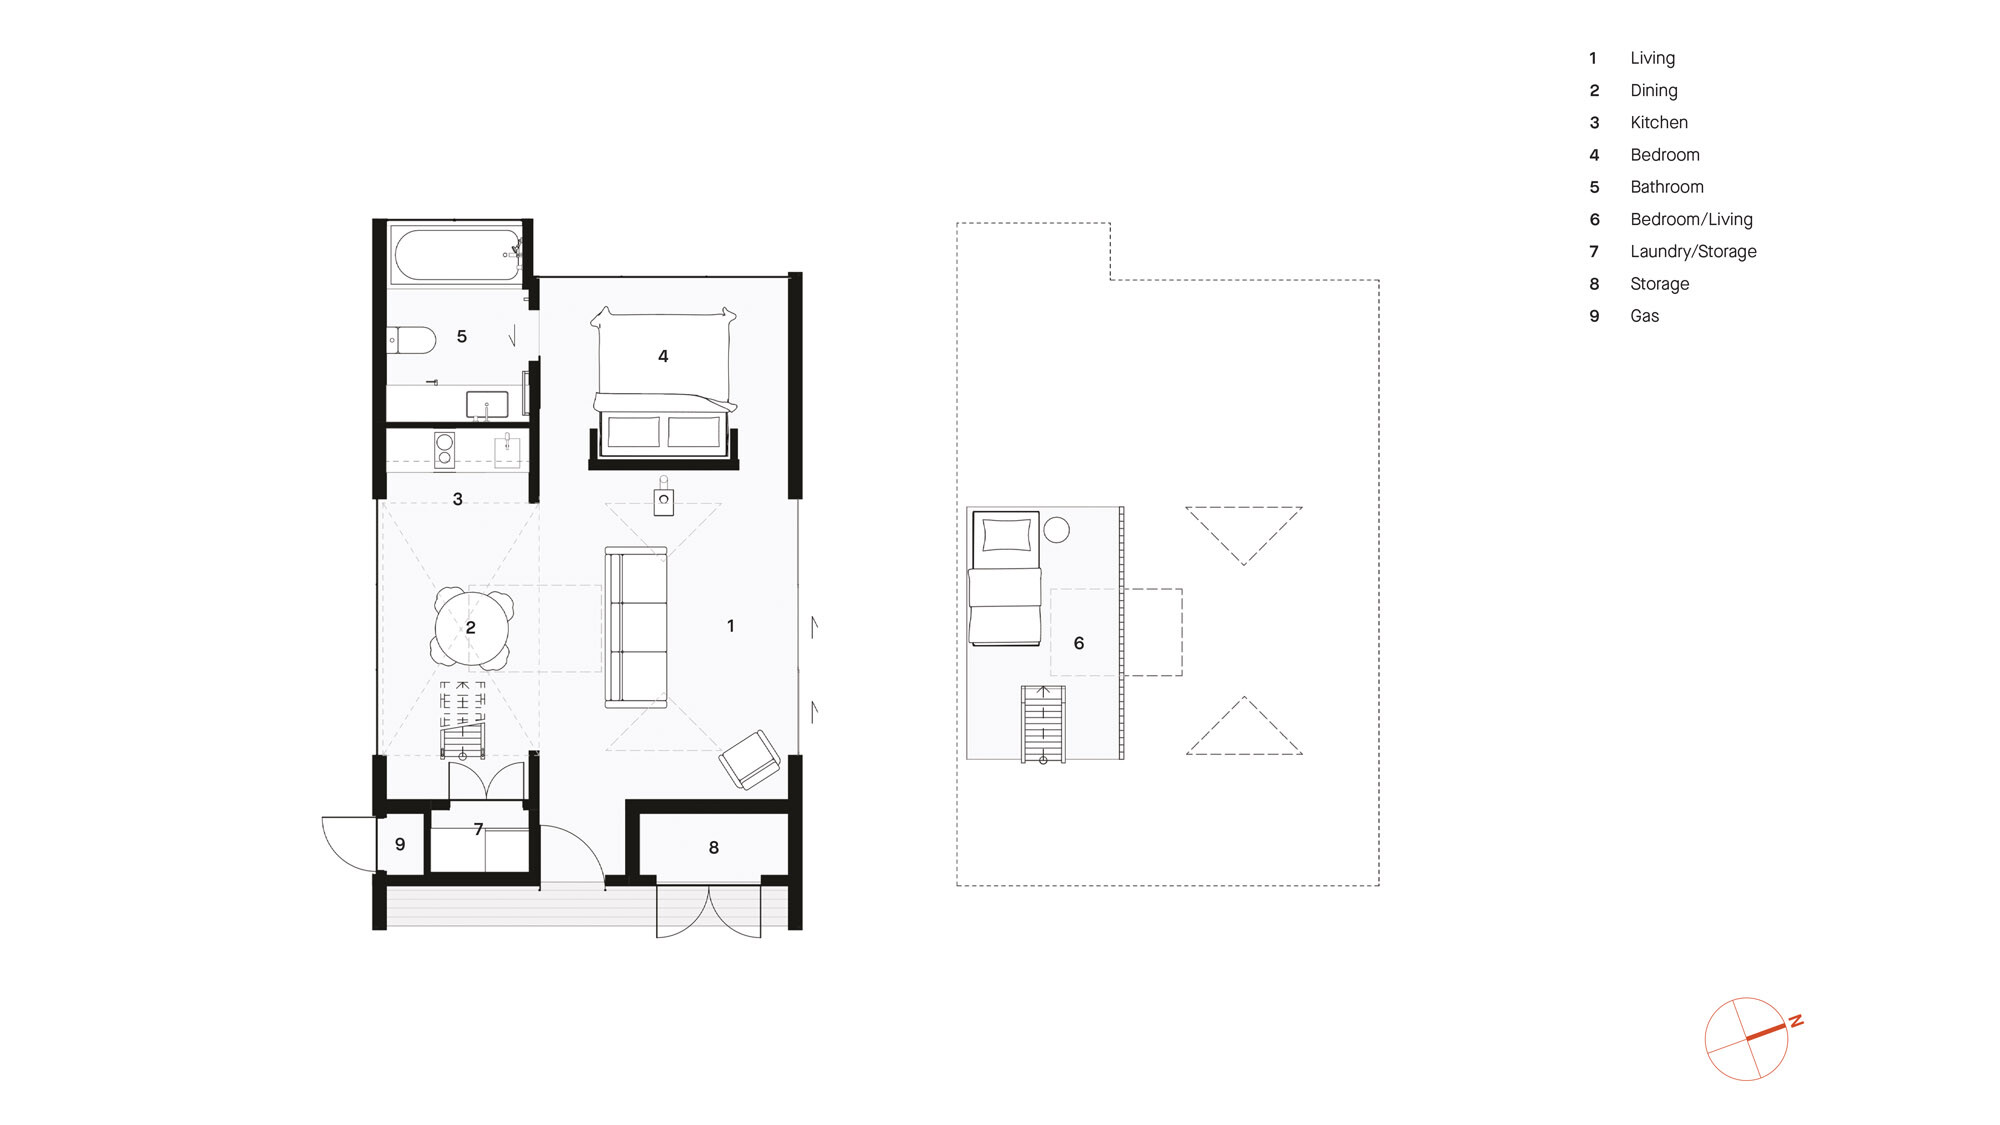 The floorplan of the building.